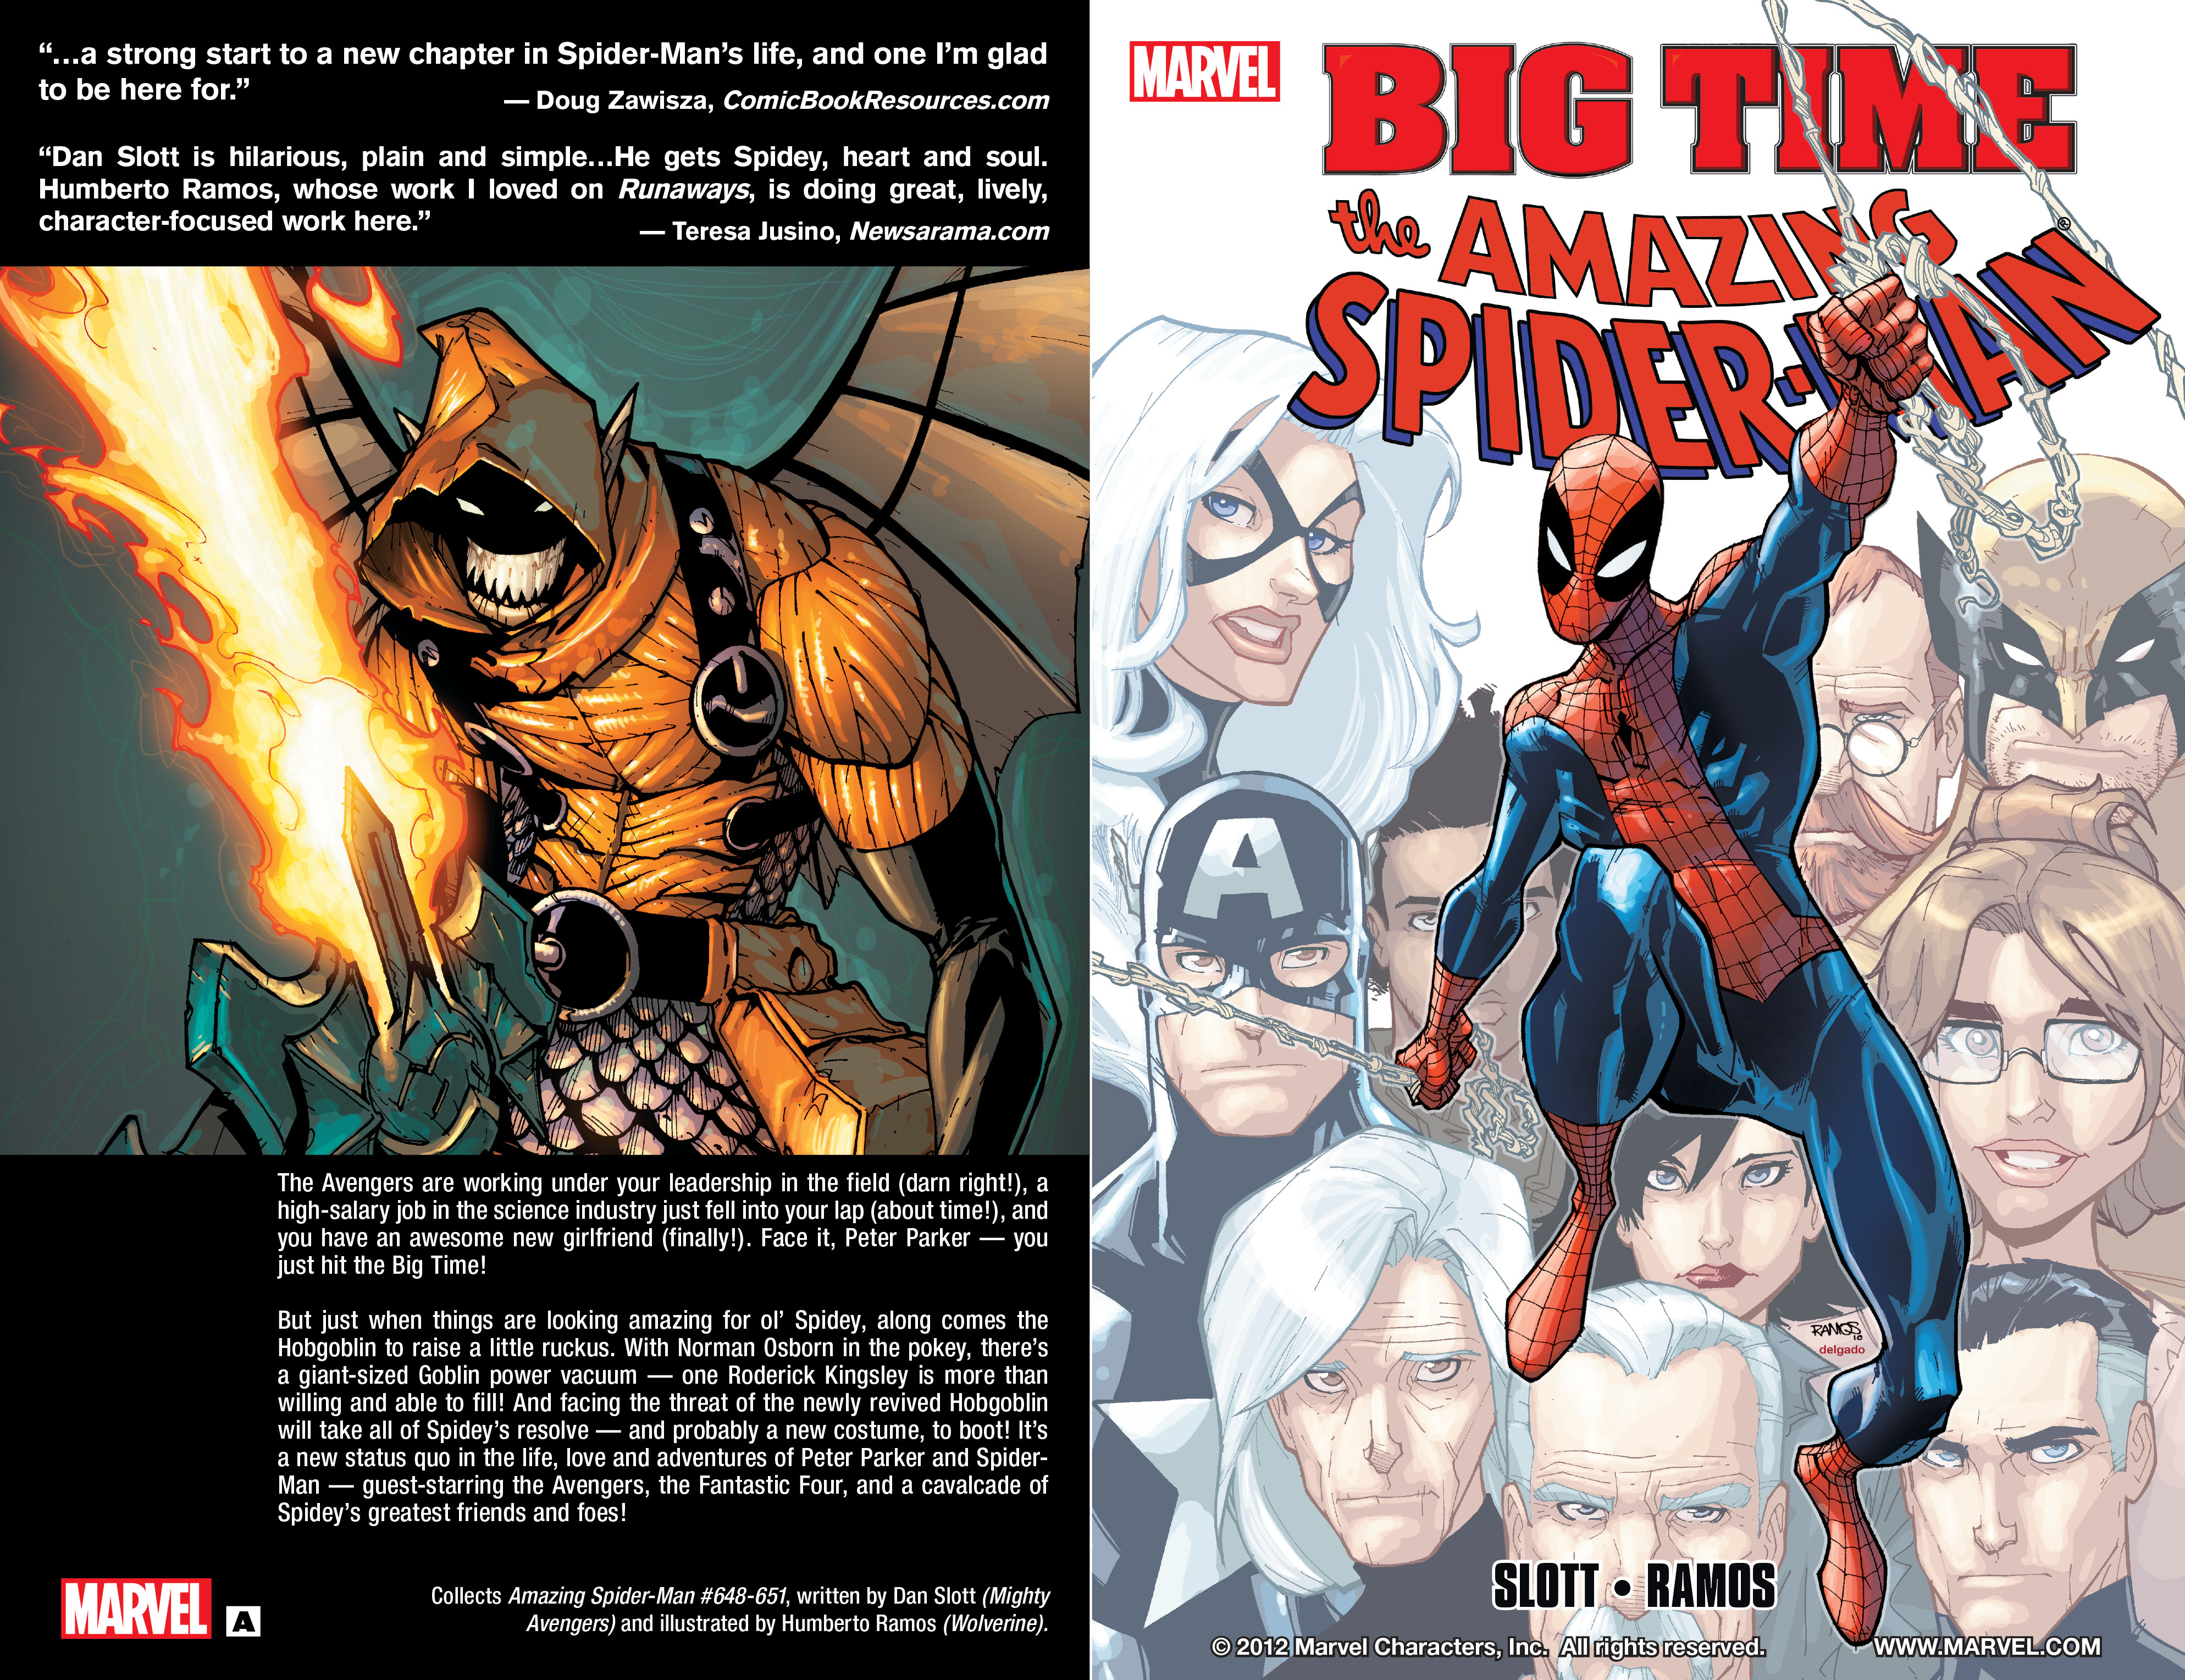 Read online Amazing Spider-Man: Big Time comic -  Issue # TPB - 2